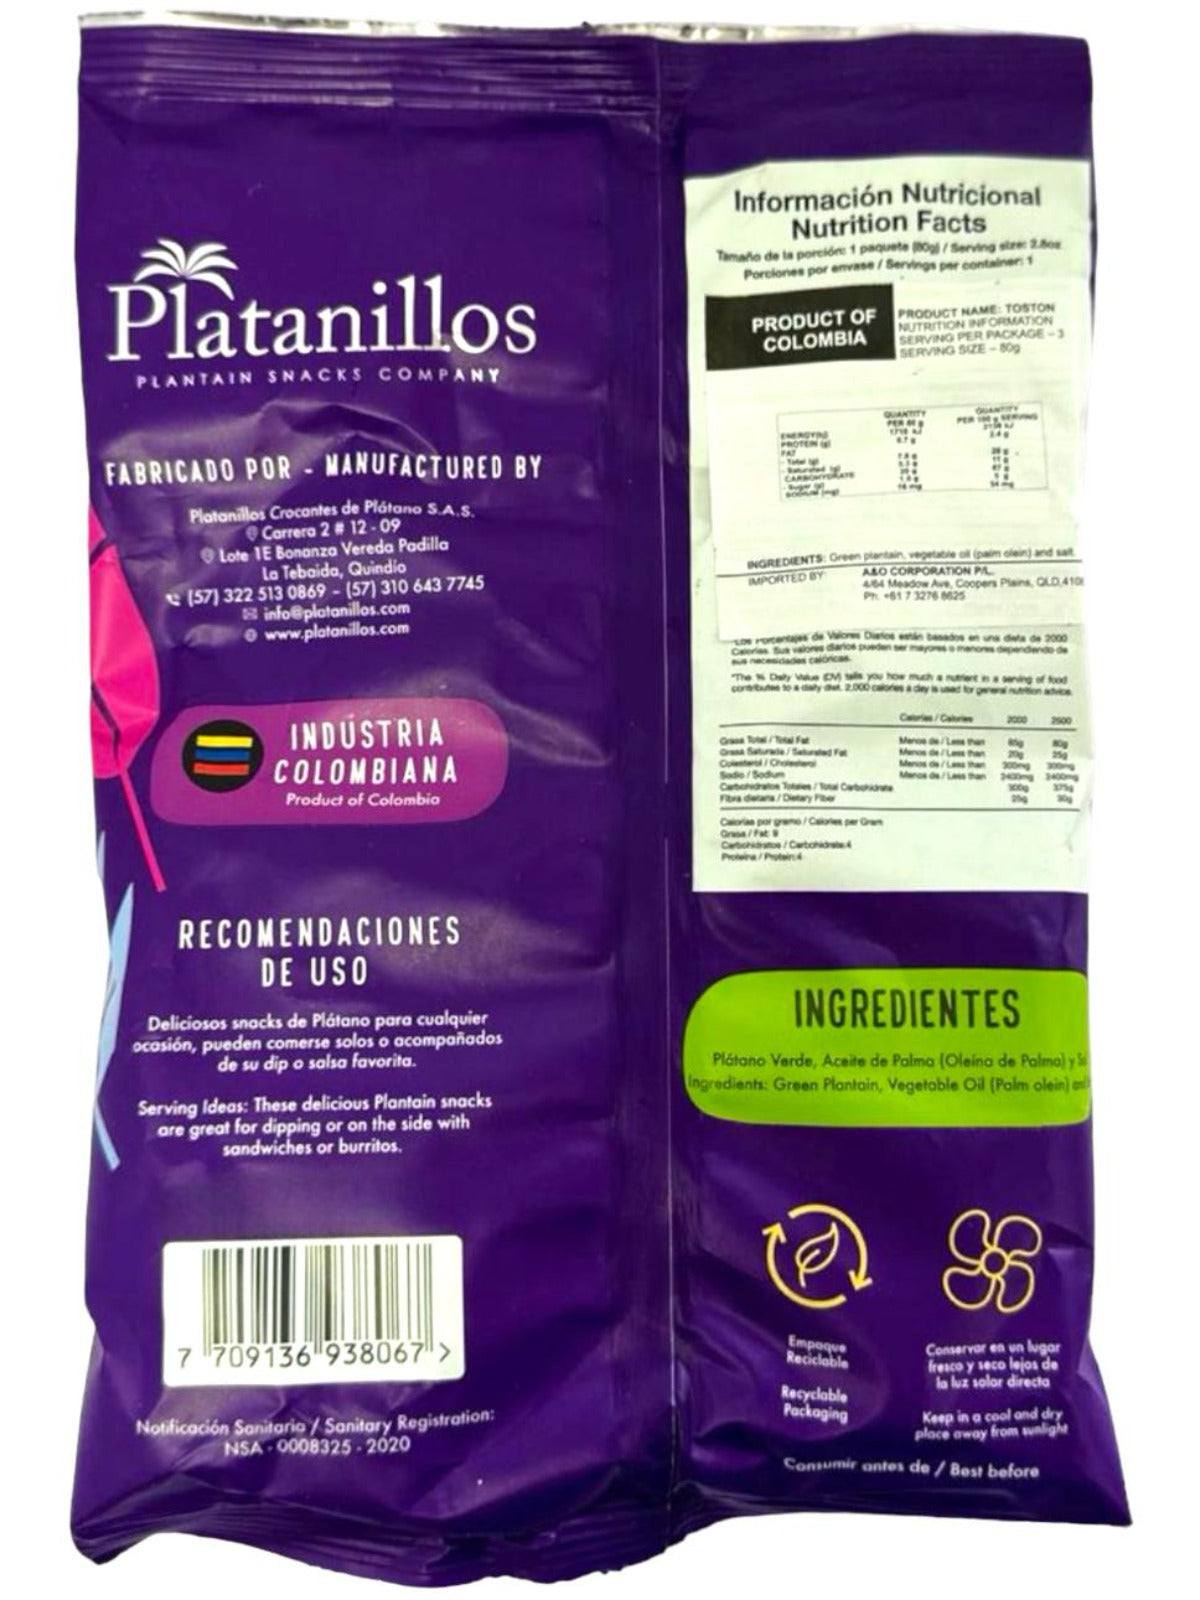 Patakis Toston Premium Plantain Toston Colombian Chips Salted 80g  Best Before End Of March 2024